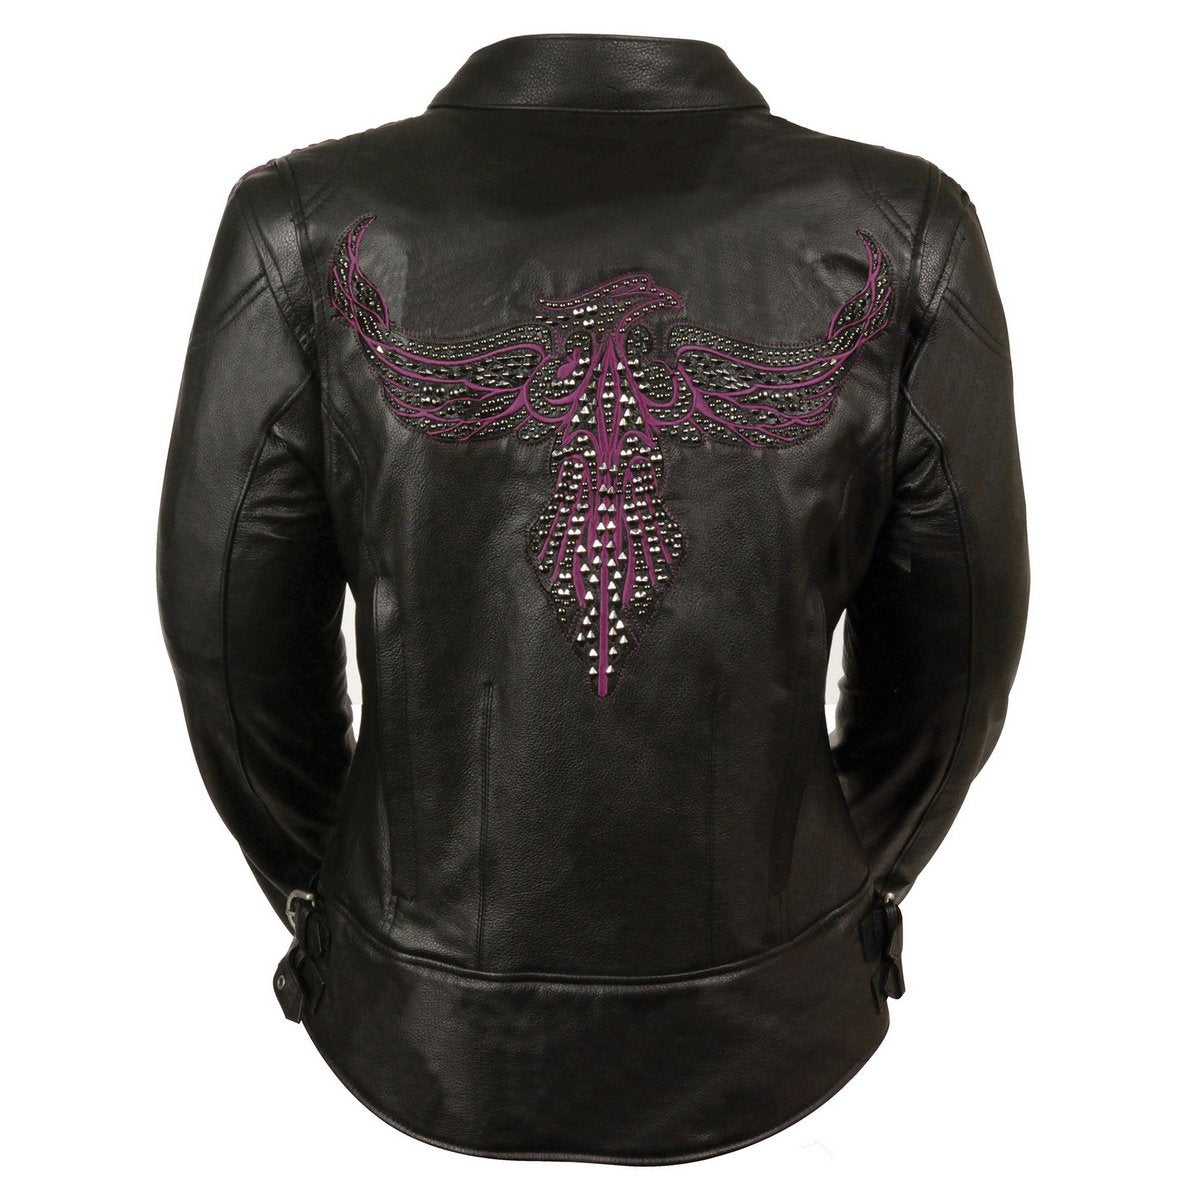 Milwaukee Leather MLL2570 Women's Phoenix Black and Purple Leather Jacket with Dual Gun Pockets - Milwaukee Leather Womens Leather Jackets